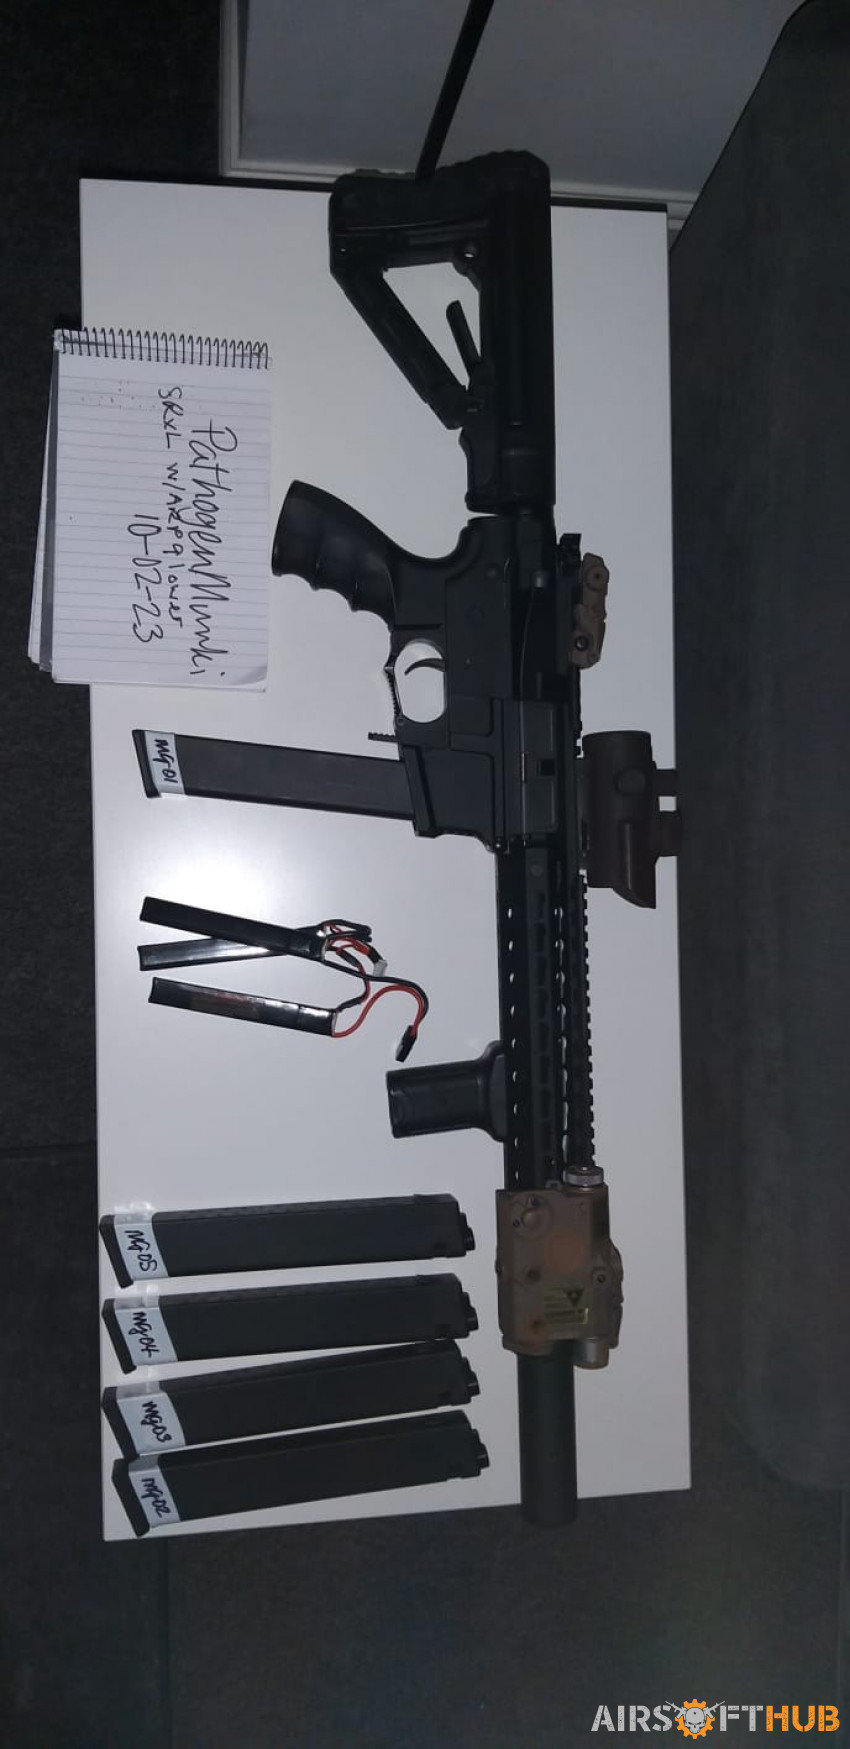 G&G cm16 SRXL with ARP9 Lower - Used airsoft equipment